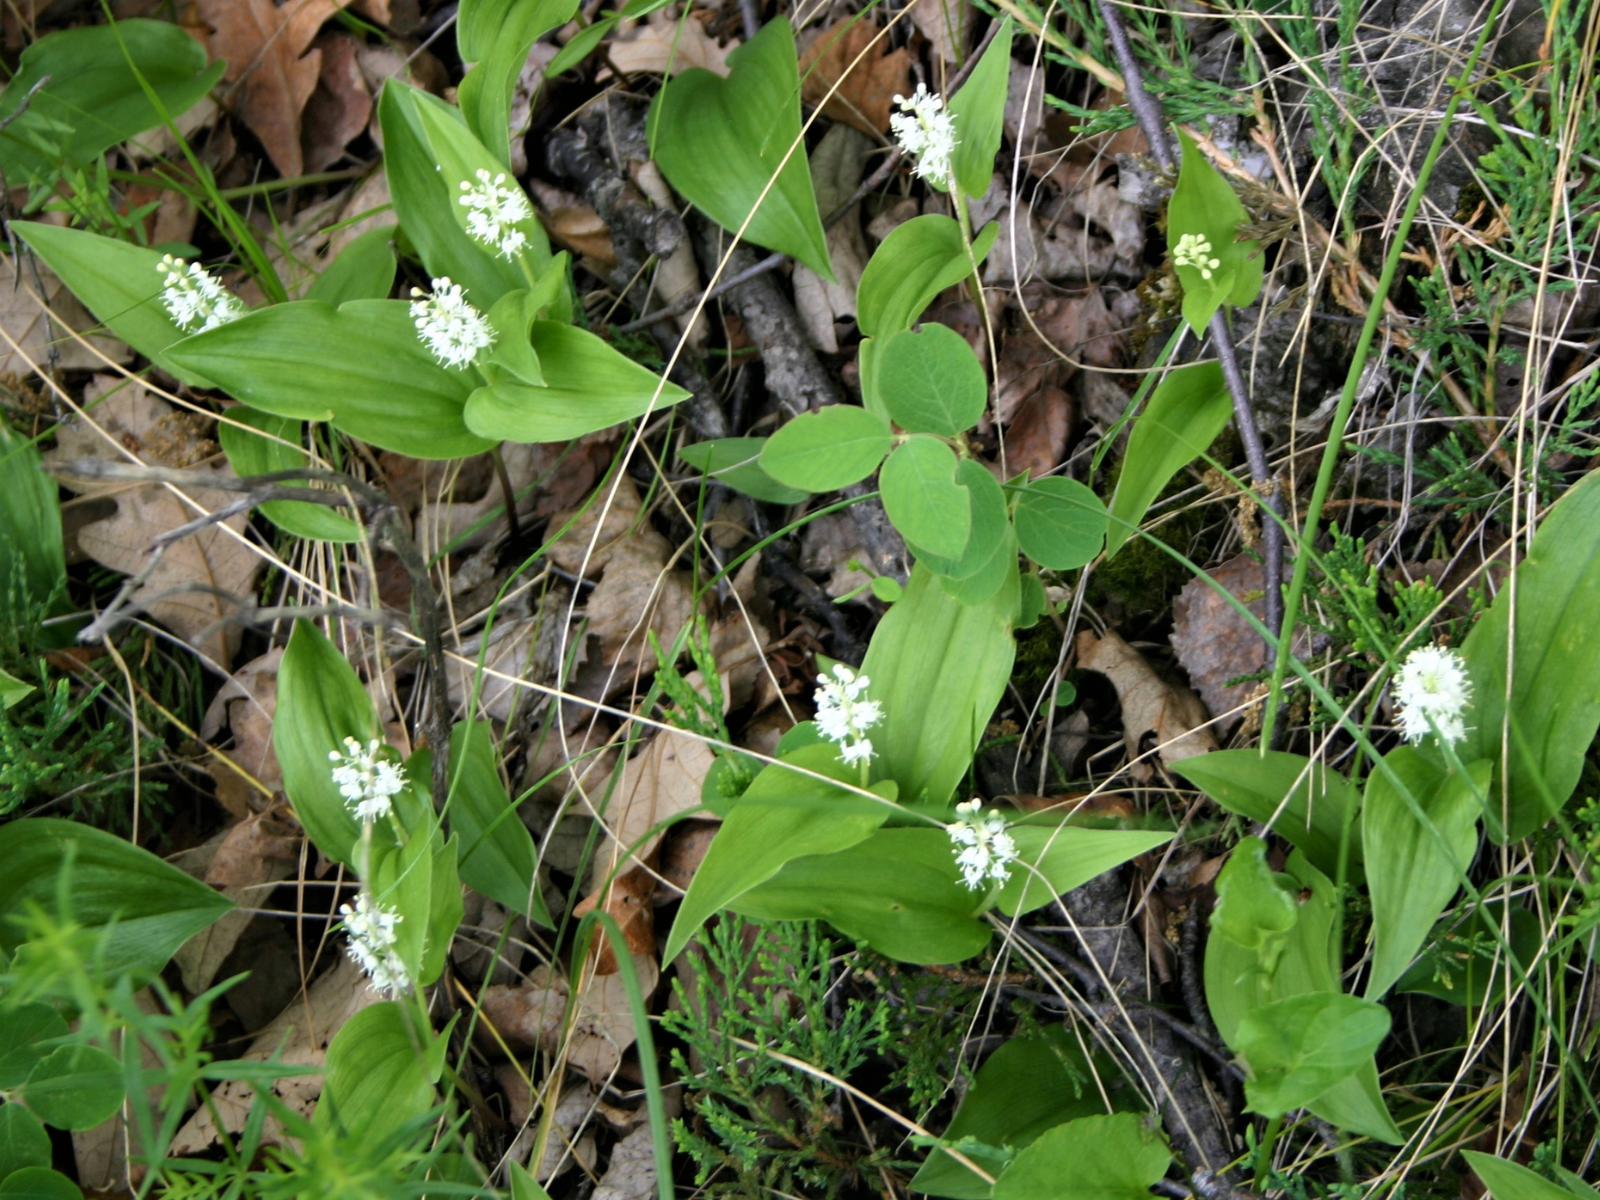 Looking down at low-growing white flowers with green leaves.